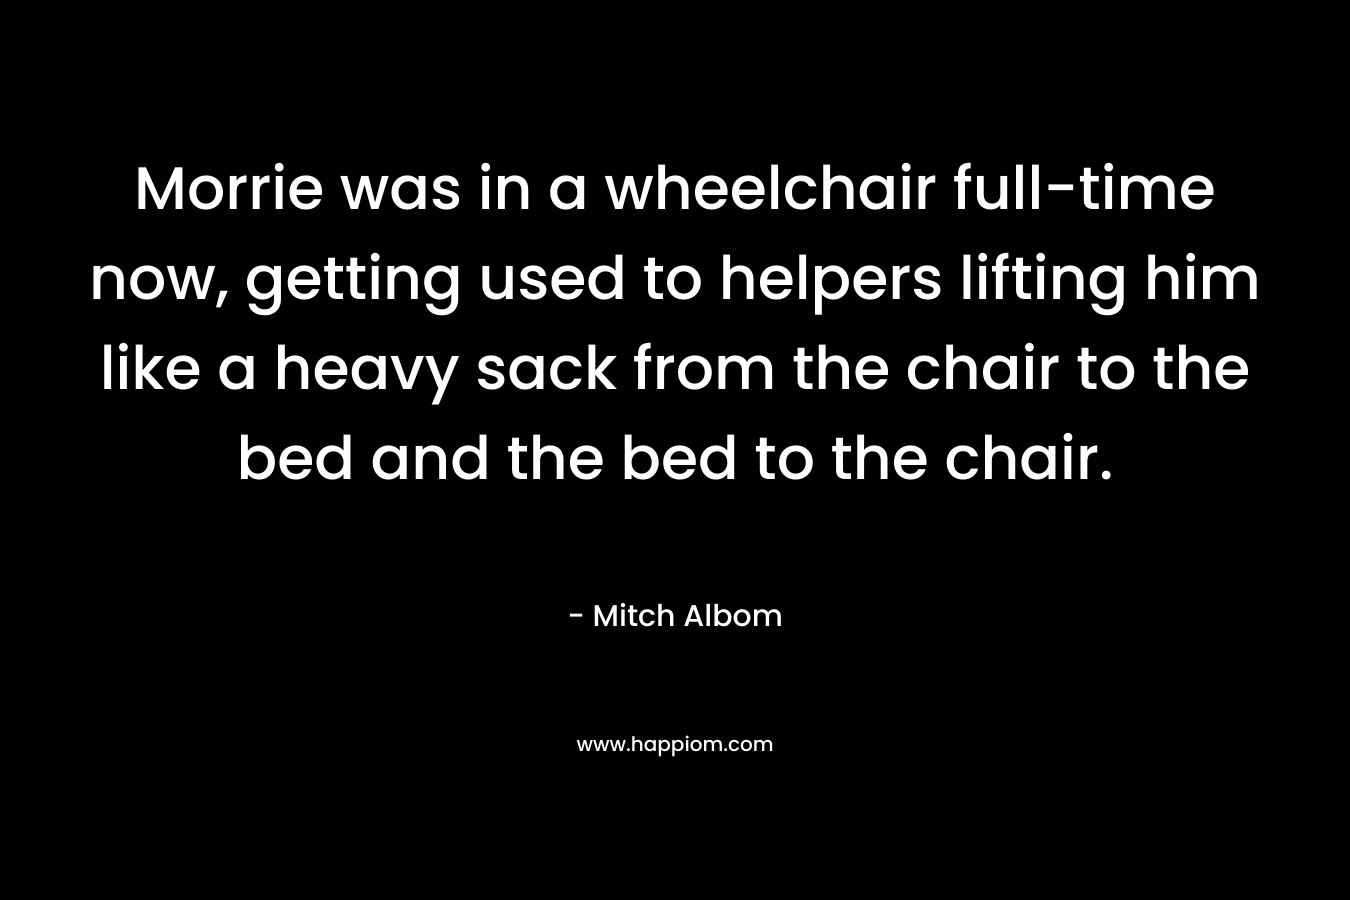 Morrie was in a wheelchair full-time now, getting used to helpers lifting him like a heavy sack from the chair to the bed and the bed to the chair.